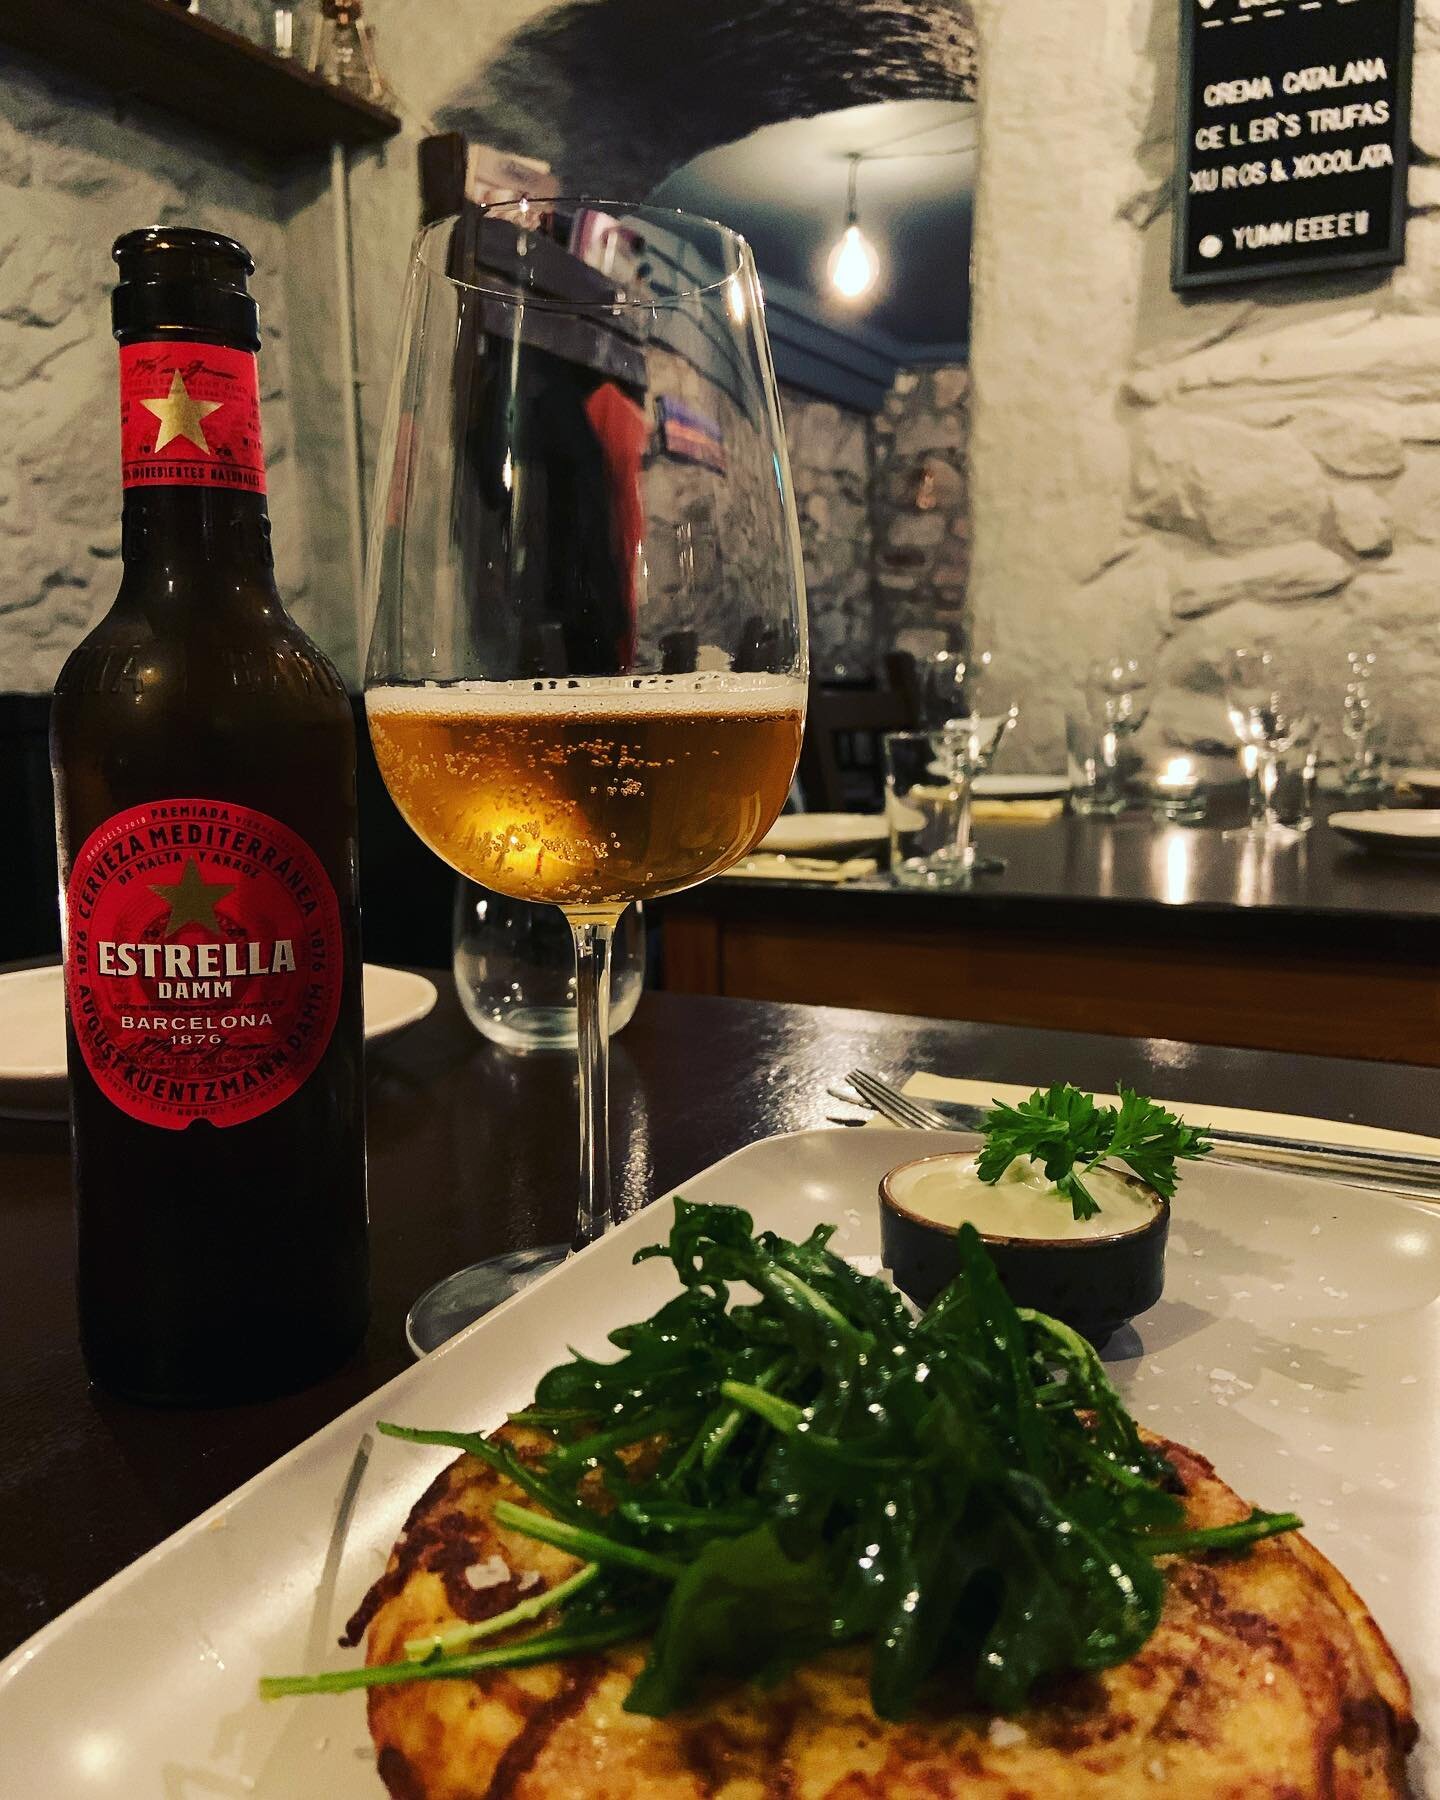 Start you Friday off right @elcellerdublin , savour our delicious Tortilla , glass of Estrella and soak in the vibes 🍴#tapas #blackrock #bankholidayweekend